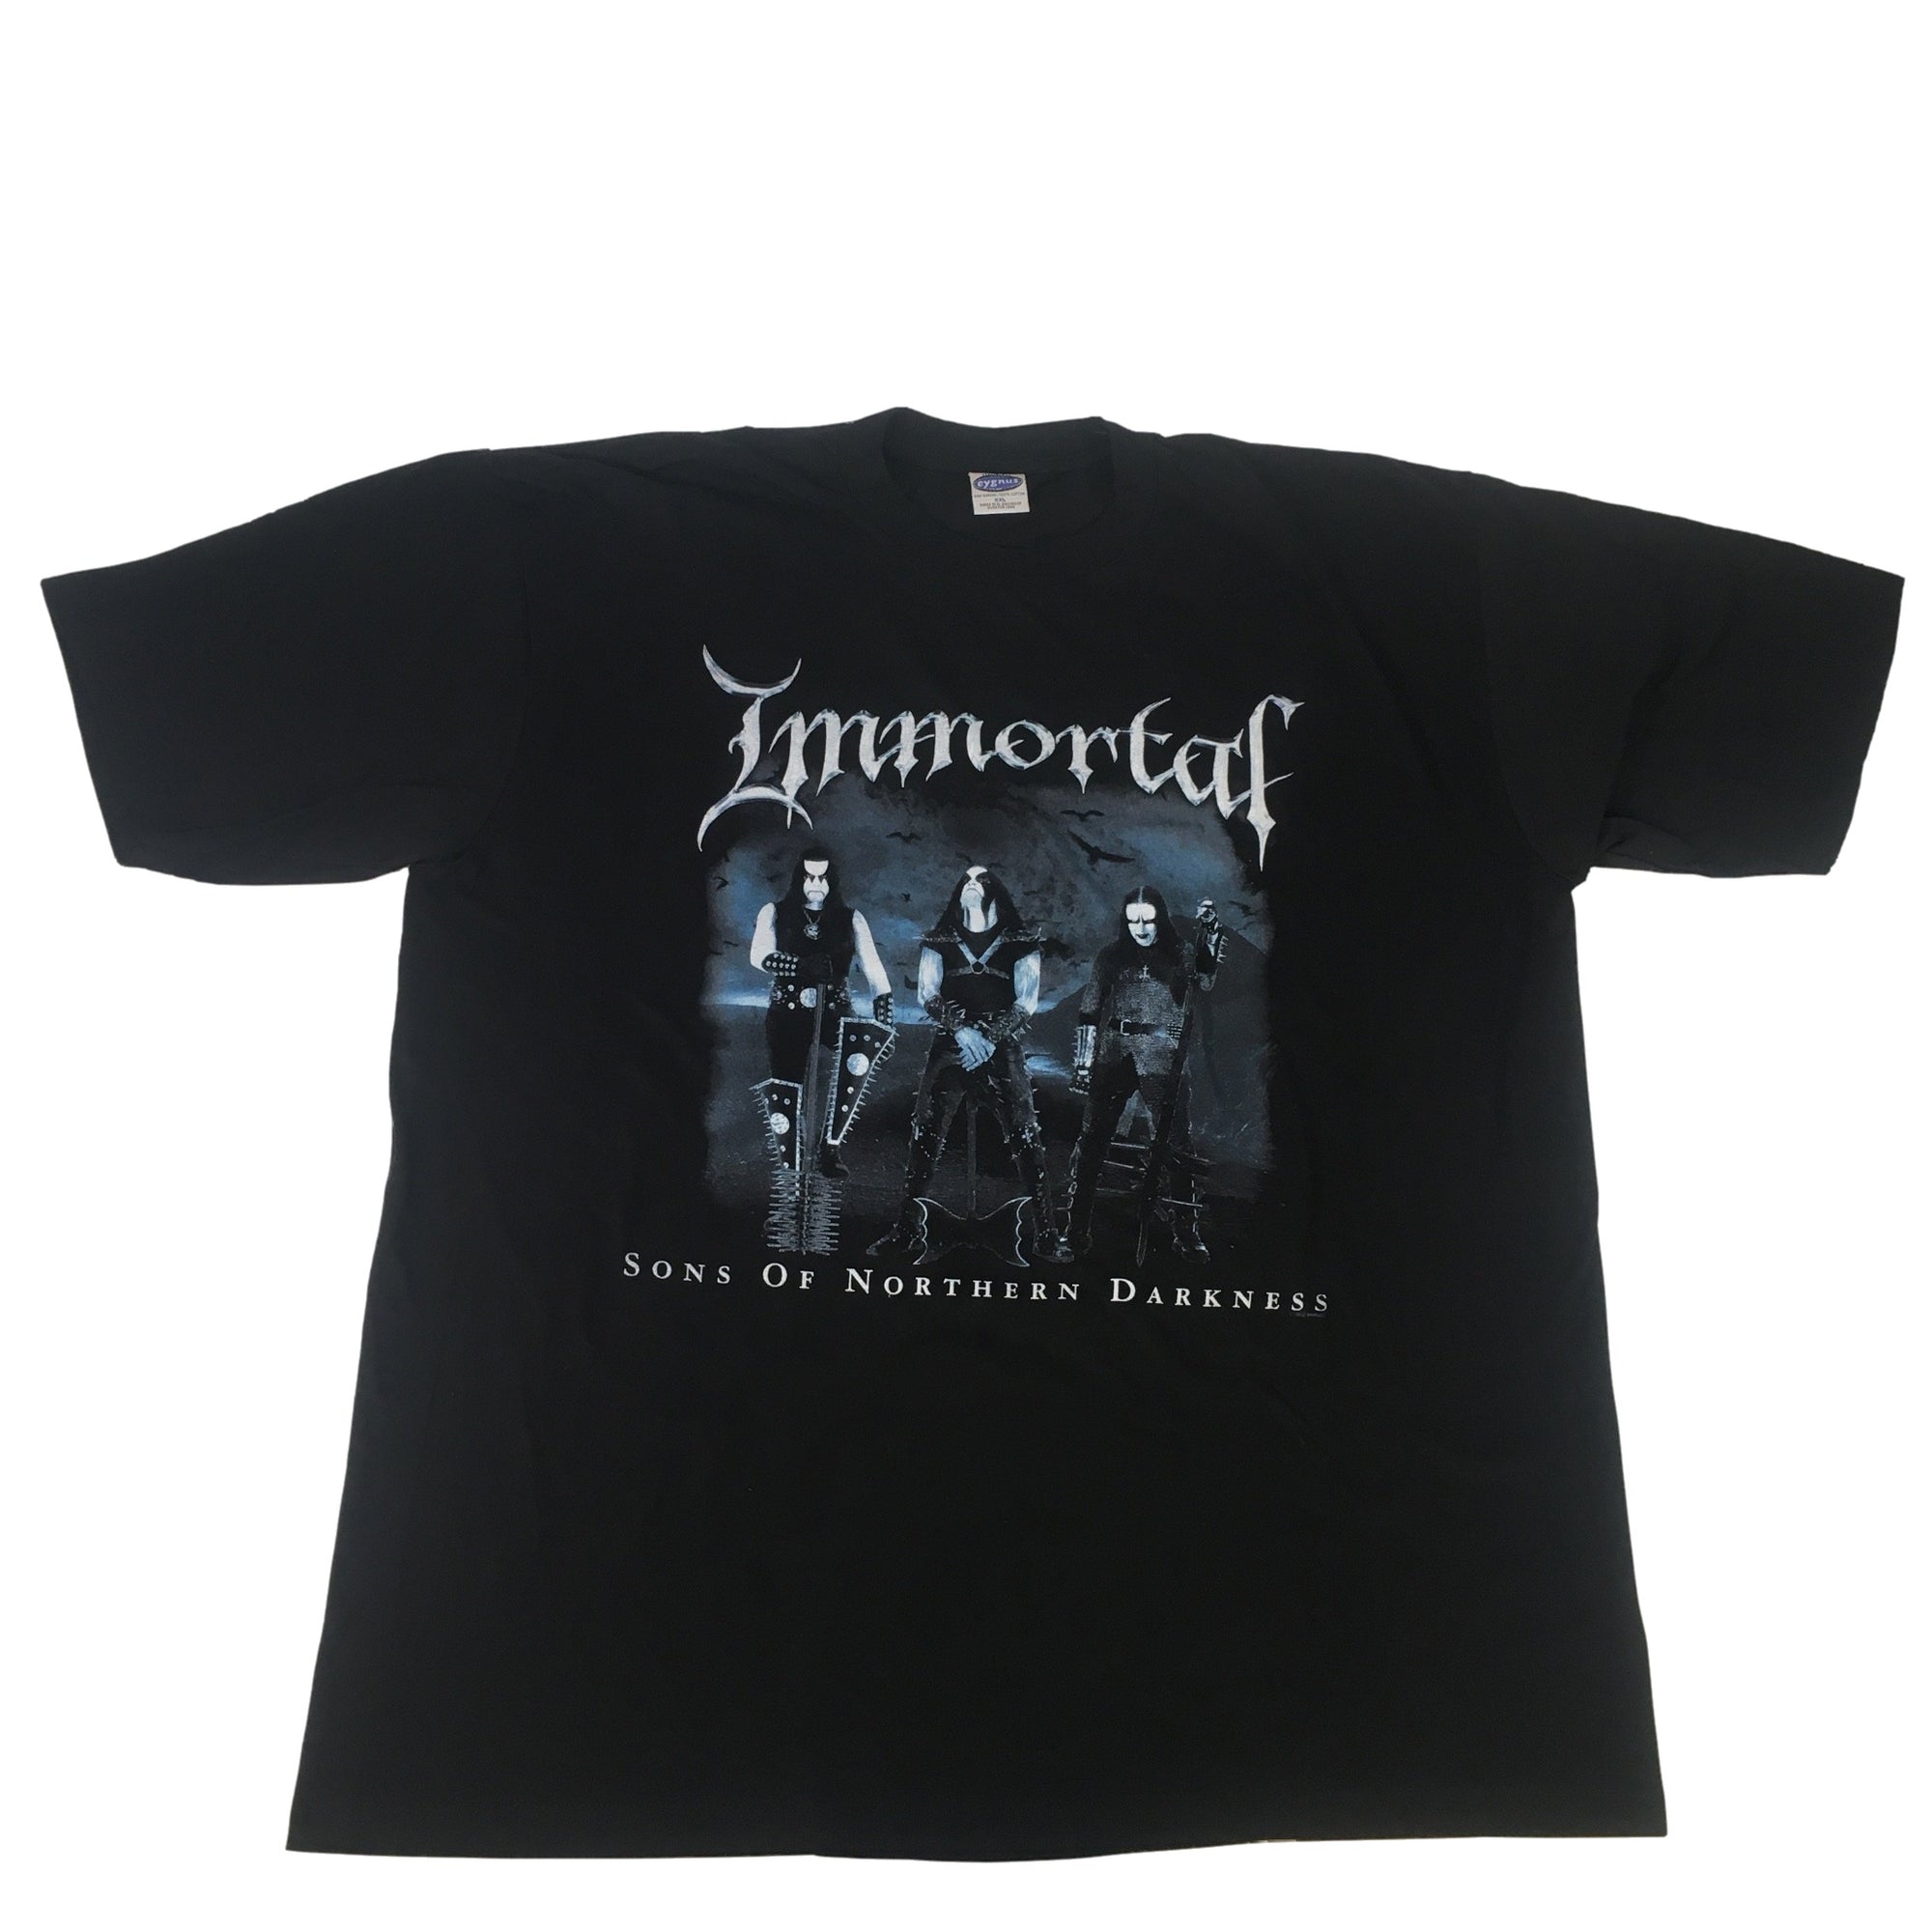 Vintage Immortal "Sons Of Northern Darkness" T-Shirt - jointcustodydc